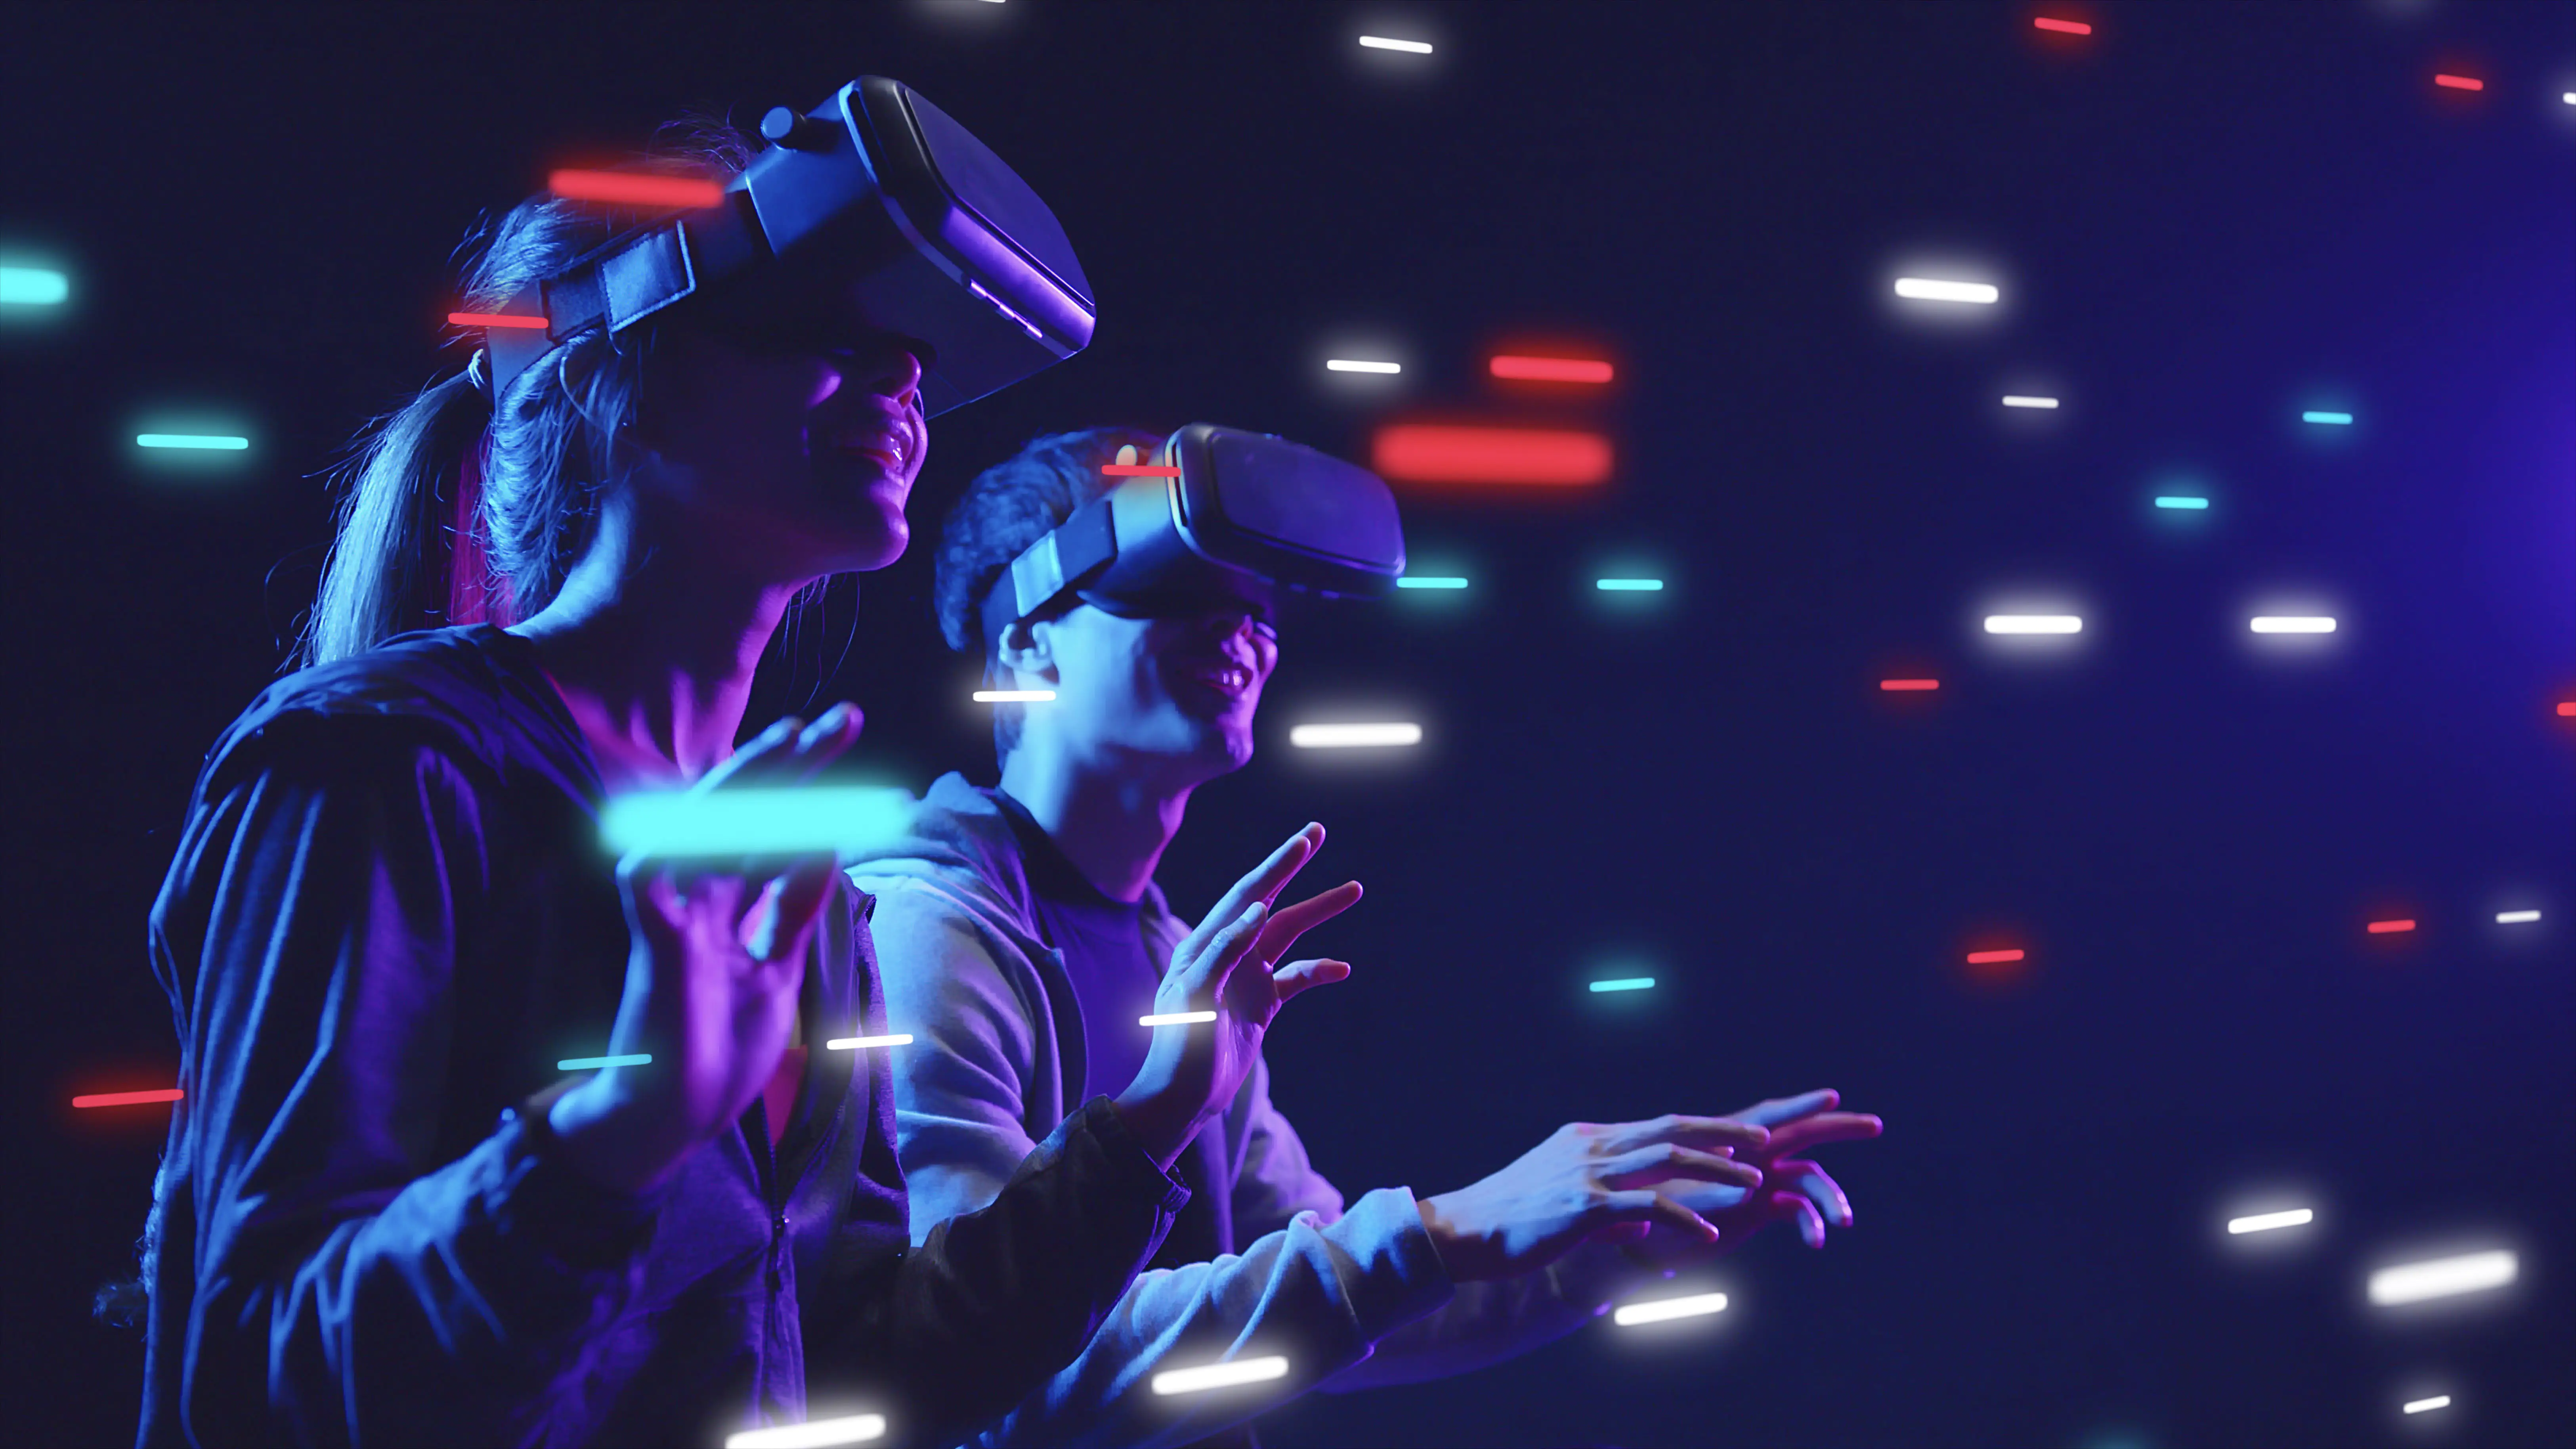 The Metaverse gives learners an immersive environment that is engaging and experiential